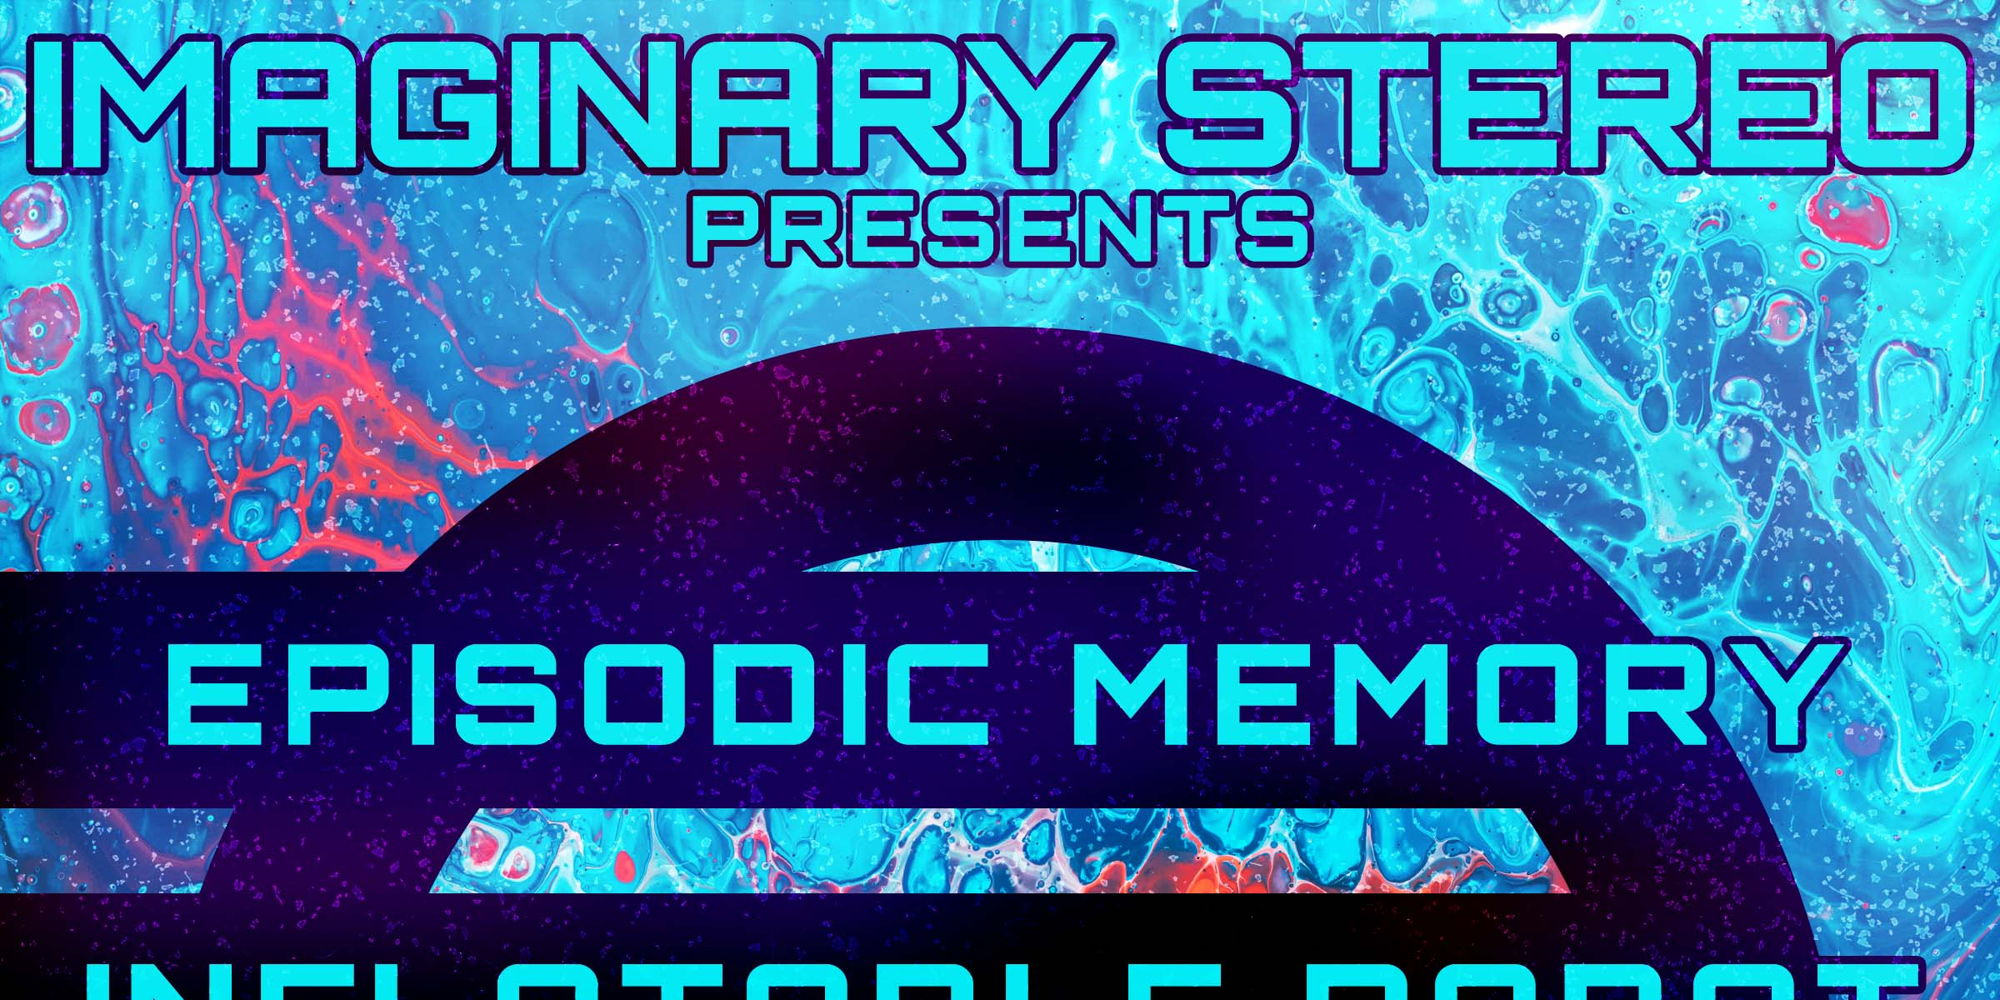 Imaginary Stereo 035 promotional image